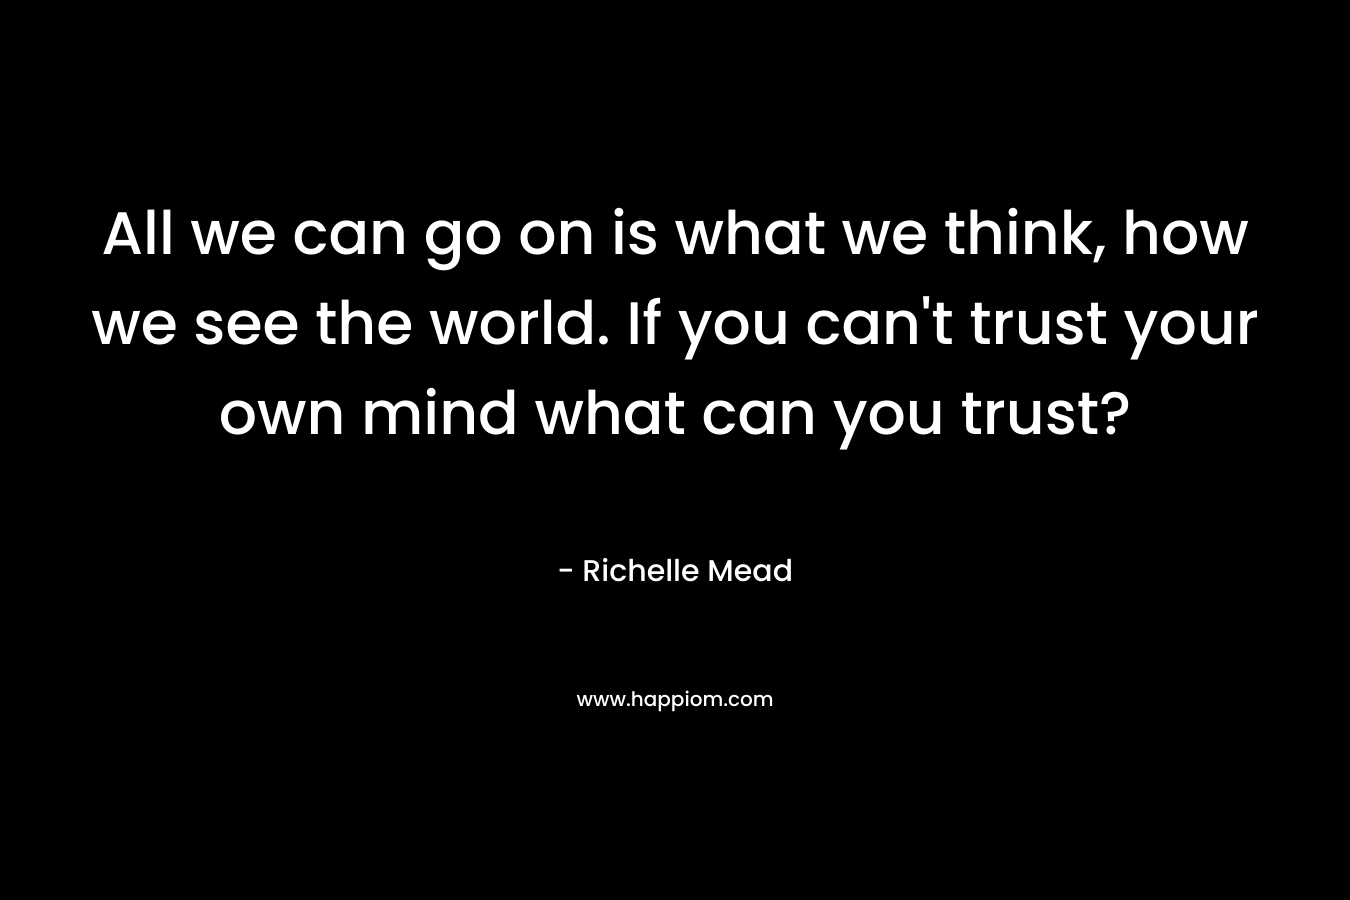 All we can go on is what we think, how we see the world. If you can't trust your own mind what can you trust?